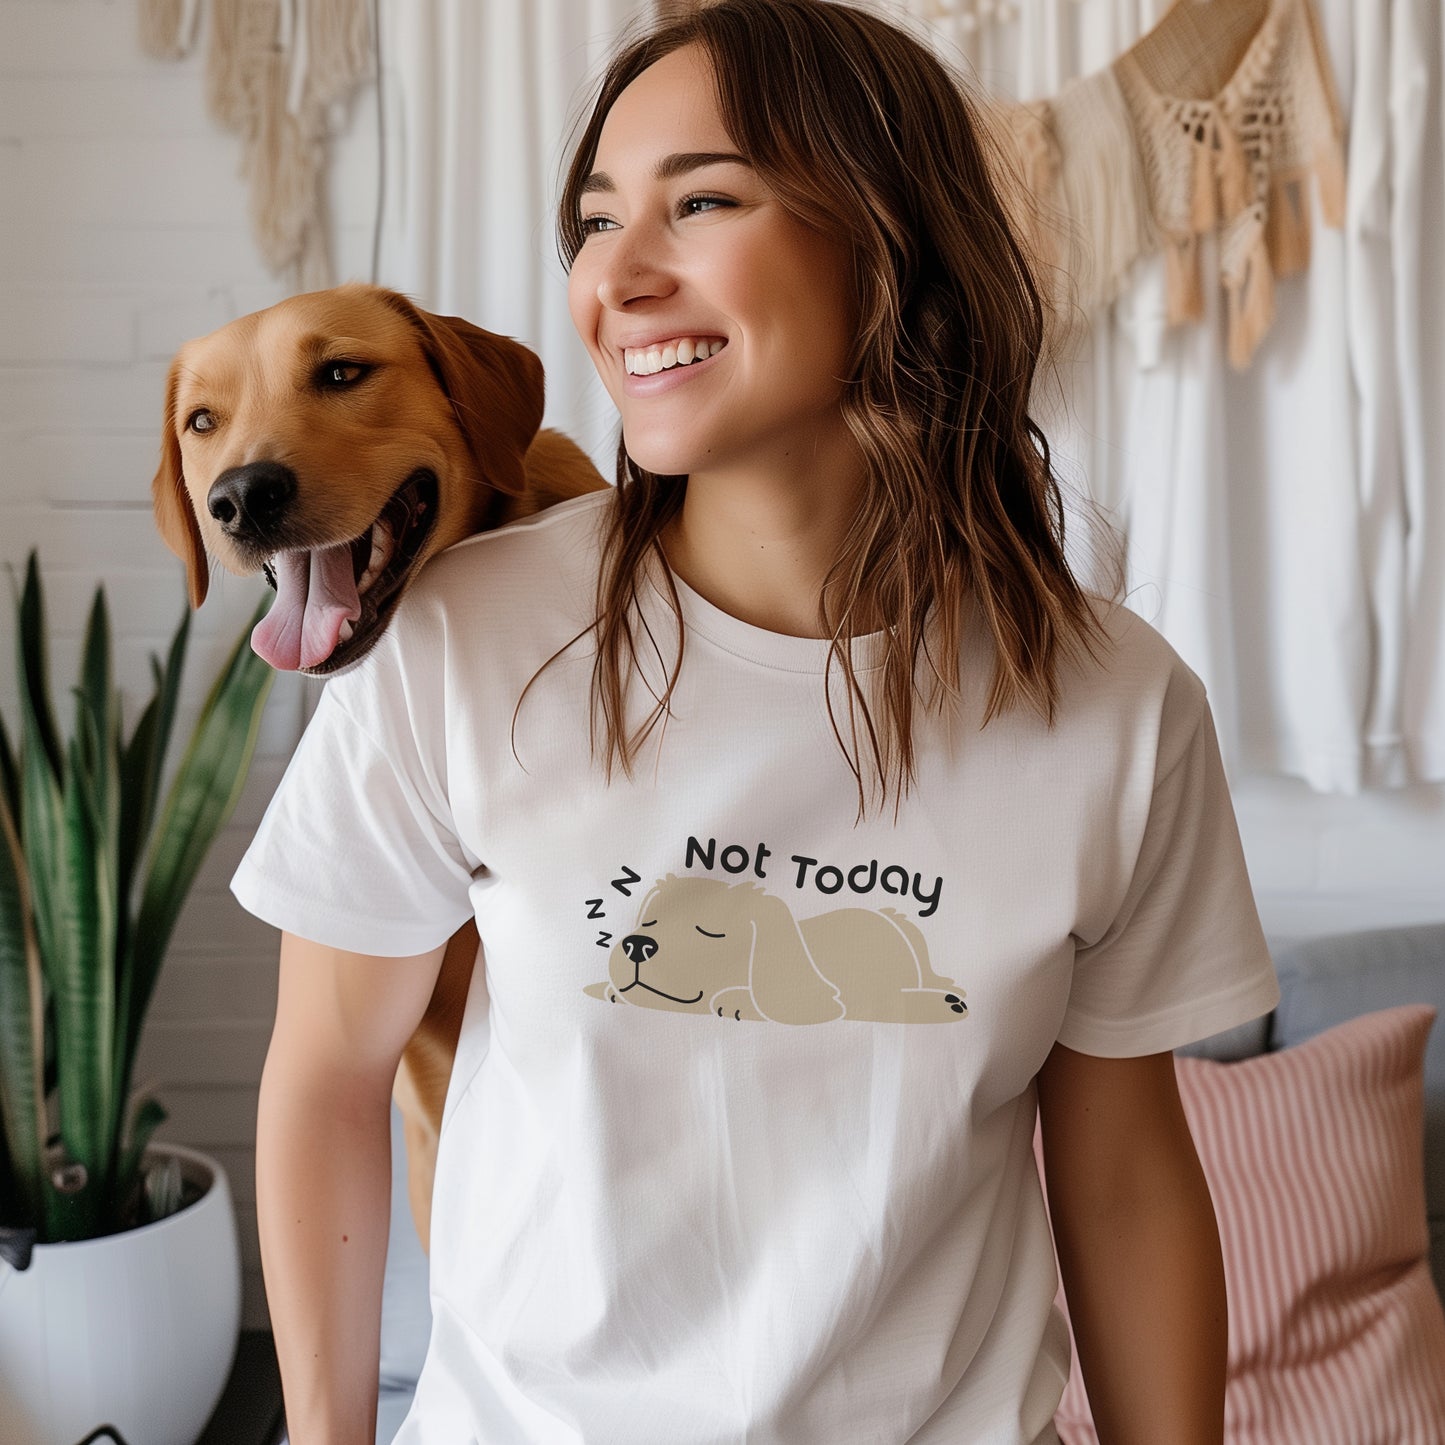 Not Today Cotton T-shirt  (White)